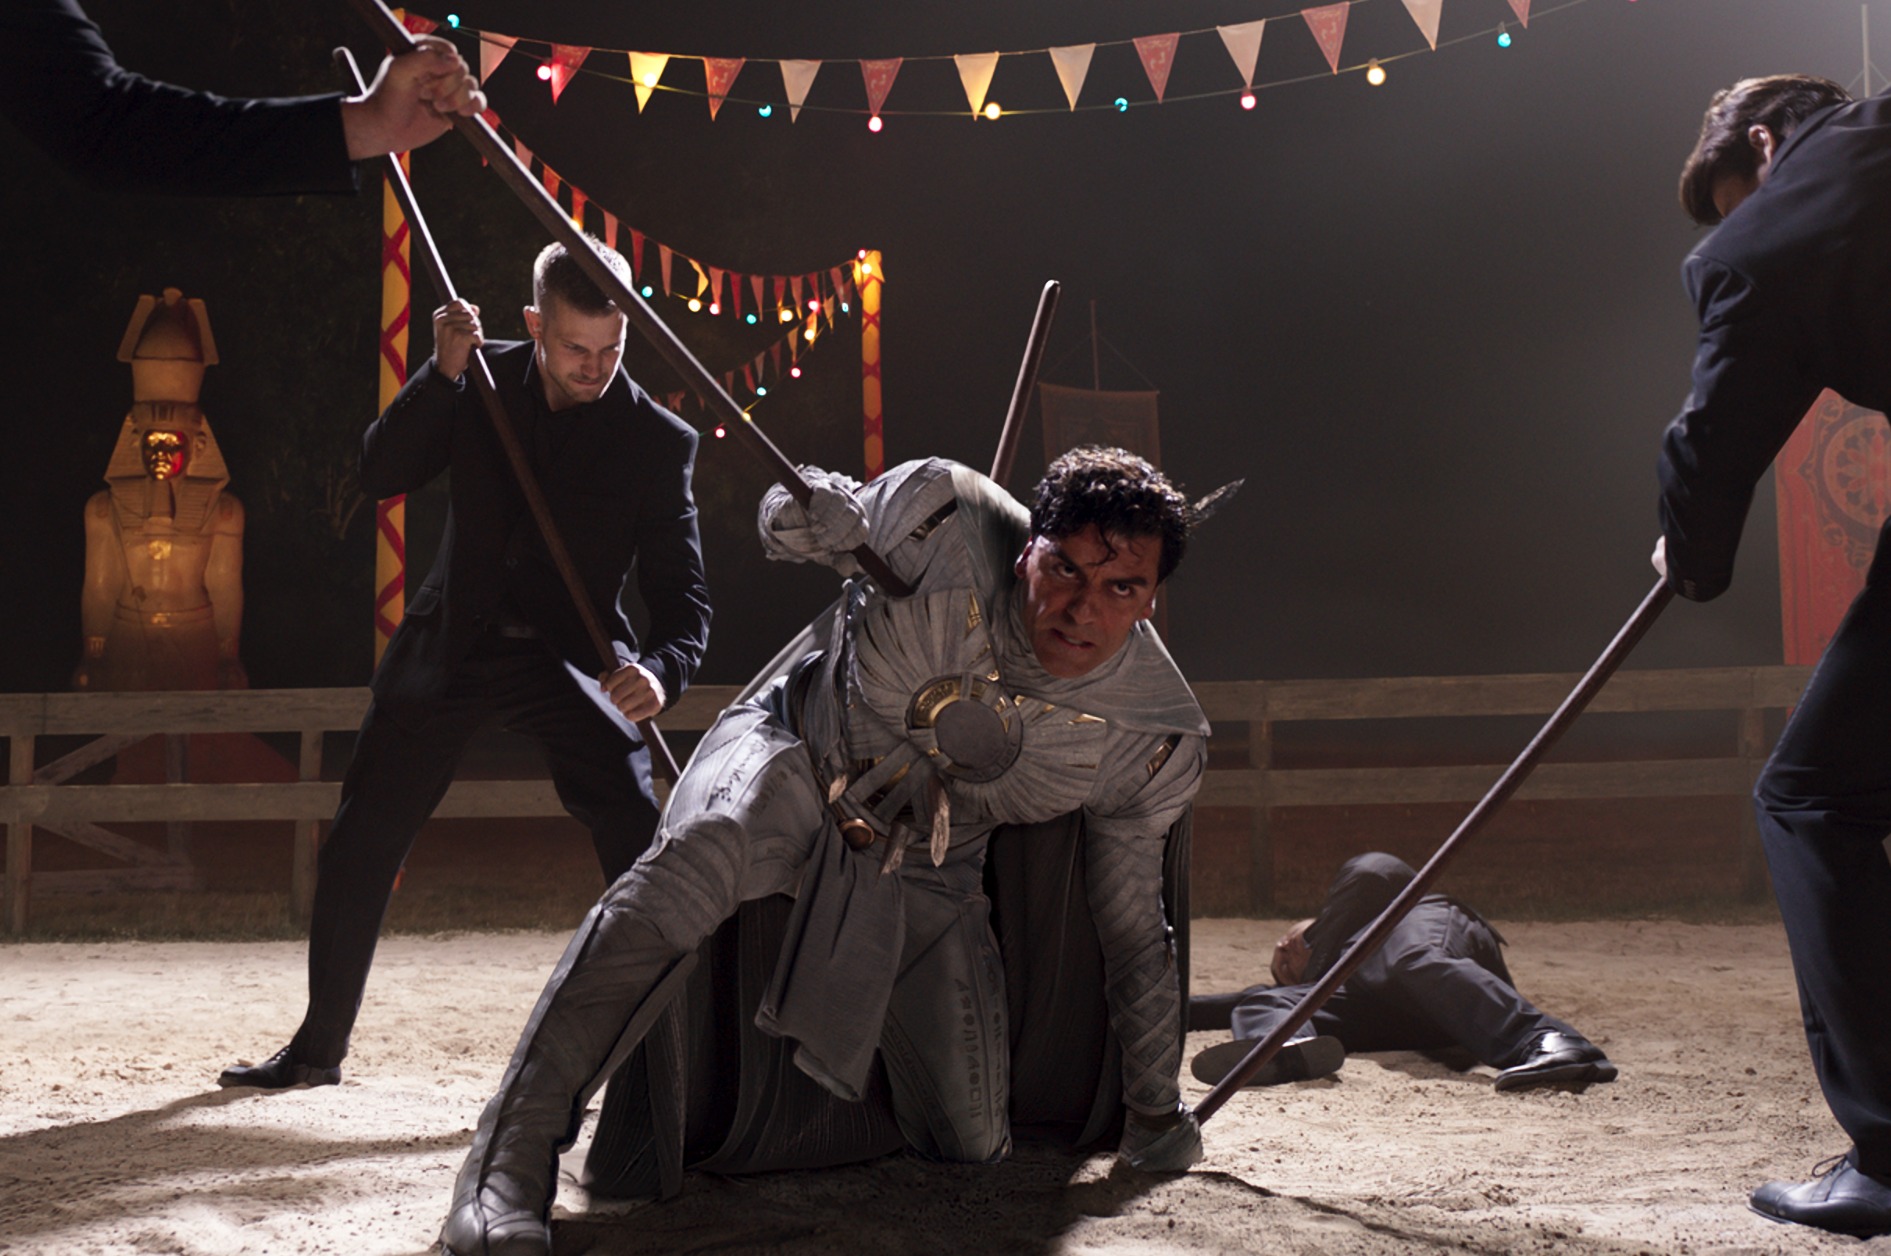 Oscar Isaac in 'Moon Knight' Episode 3. He's fighting three men and kneeling as he defends himself.